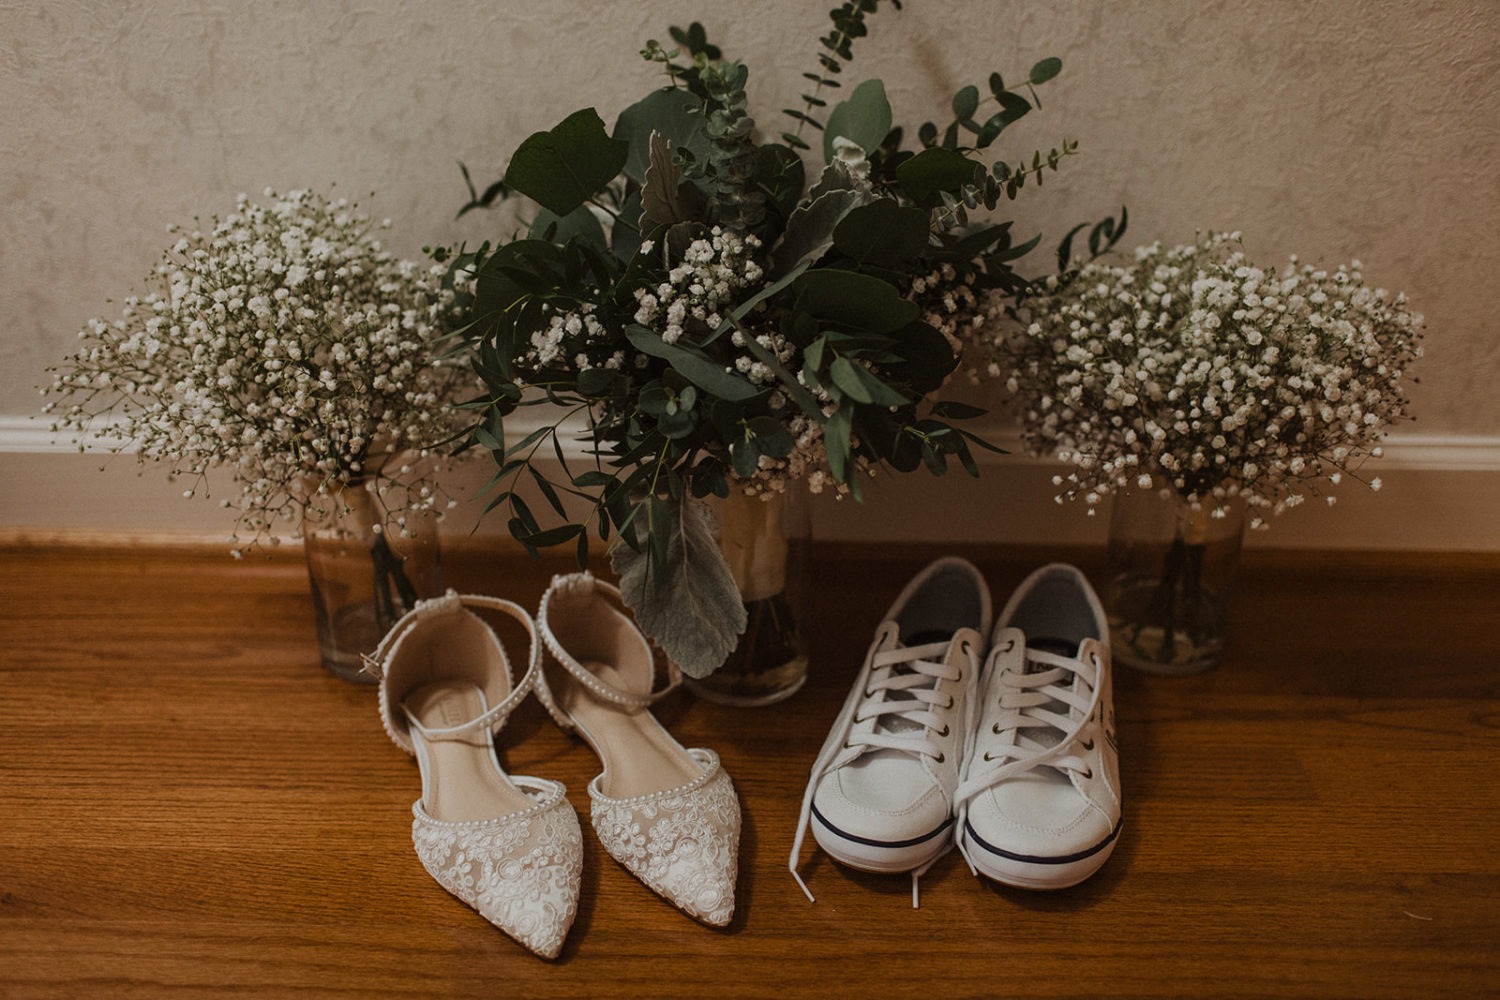 Bridal shoes with flowers set on floor